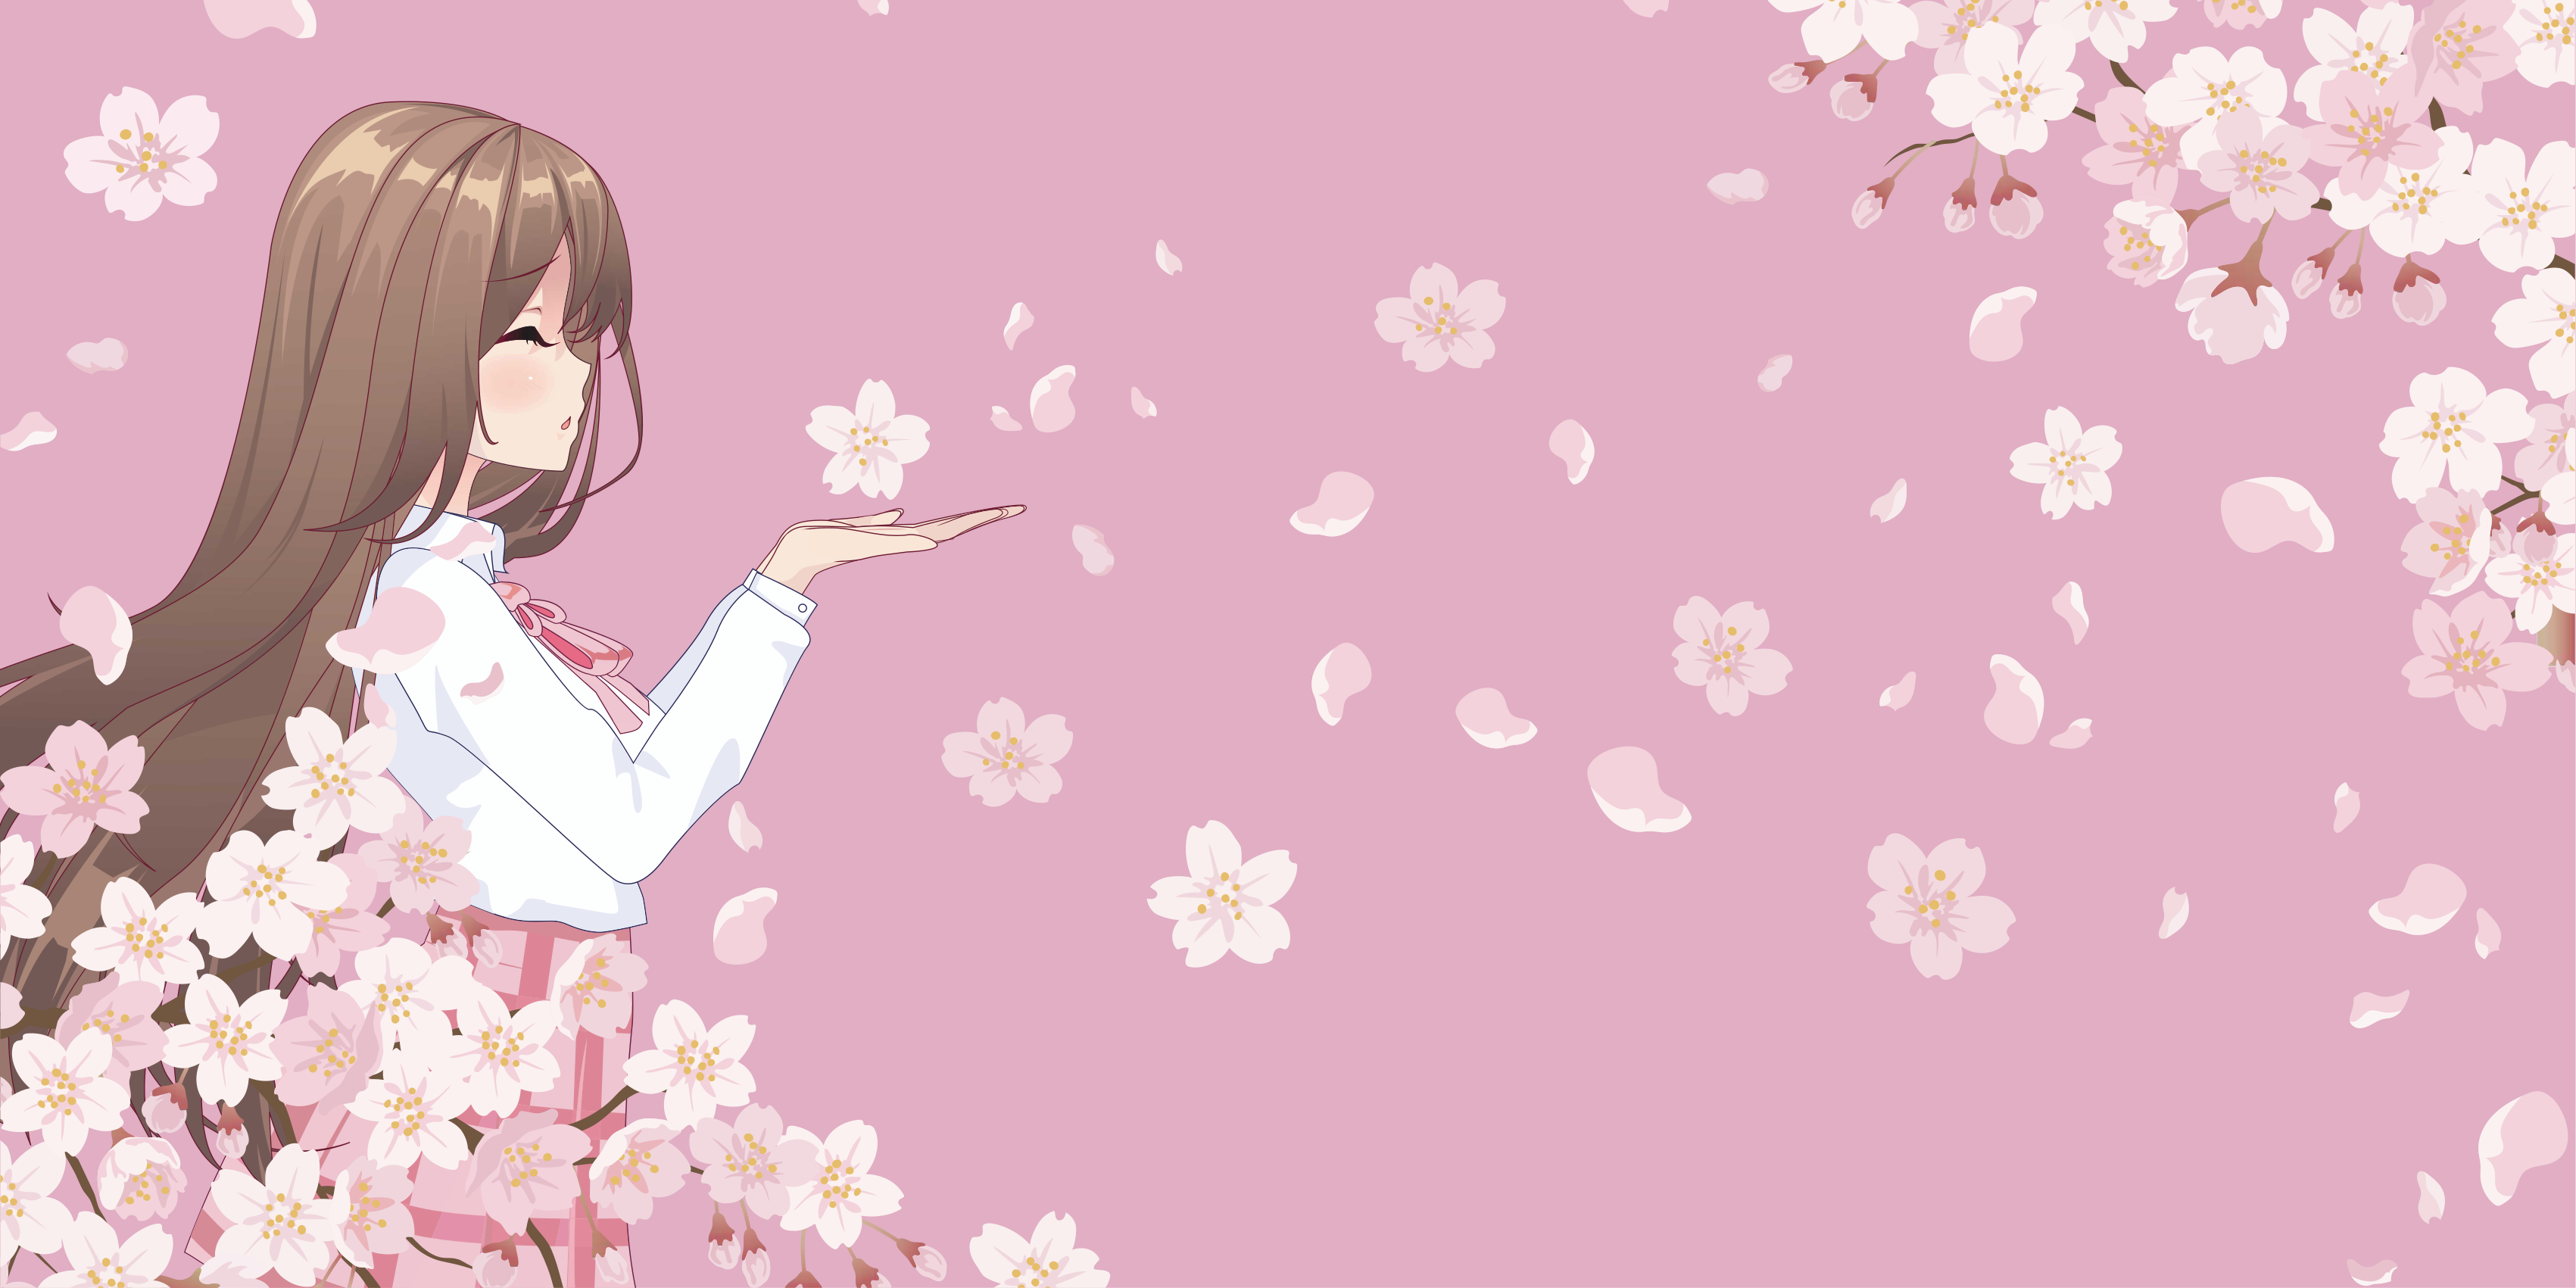 14,754 Anime Flower Images, Stock Photos, 3D objects, & Vectors |  Shutterstock